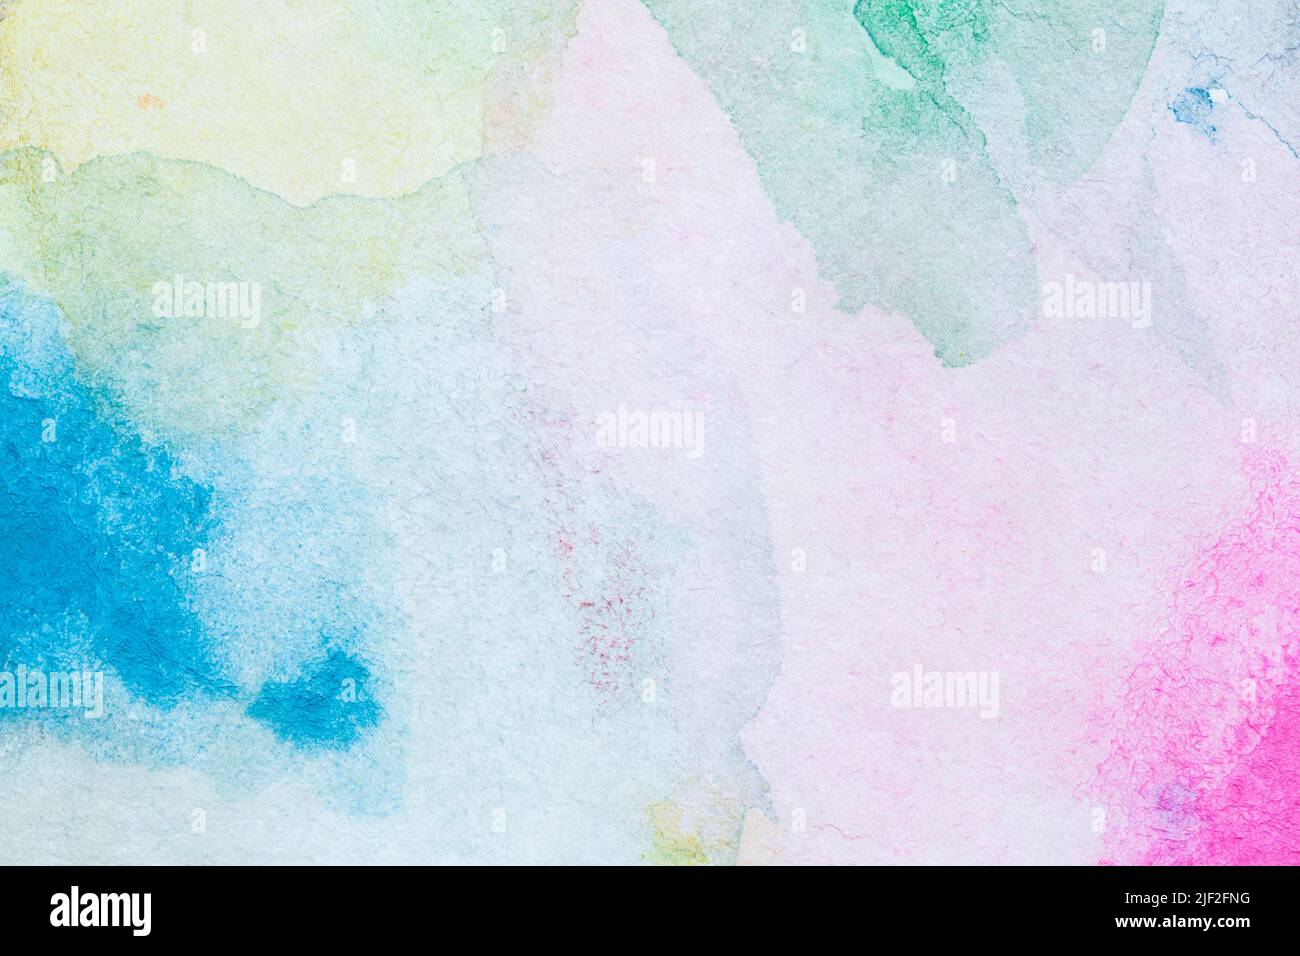 Macro close-up of an abstract colorful watercolor gradient fill background with watercolour stains. Full frame textured white paper background. Stock Photo